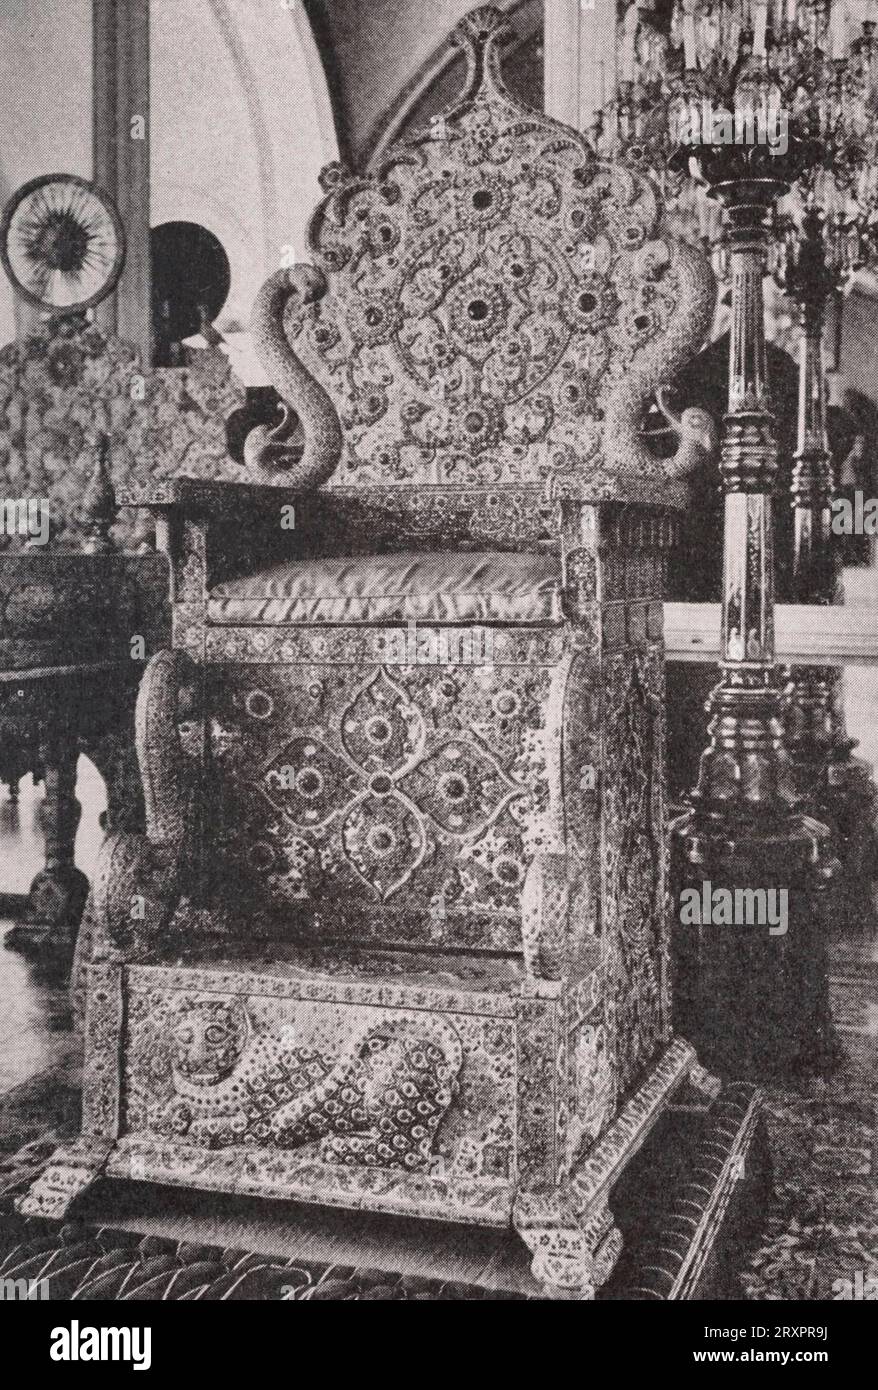 The Famous Peacock Throne now in the Royal Palace in Teheran, Iran, circa 1937 Stock Photo